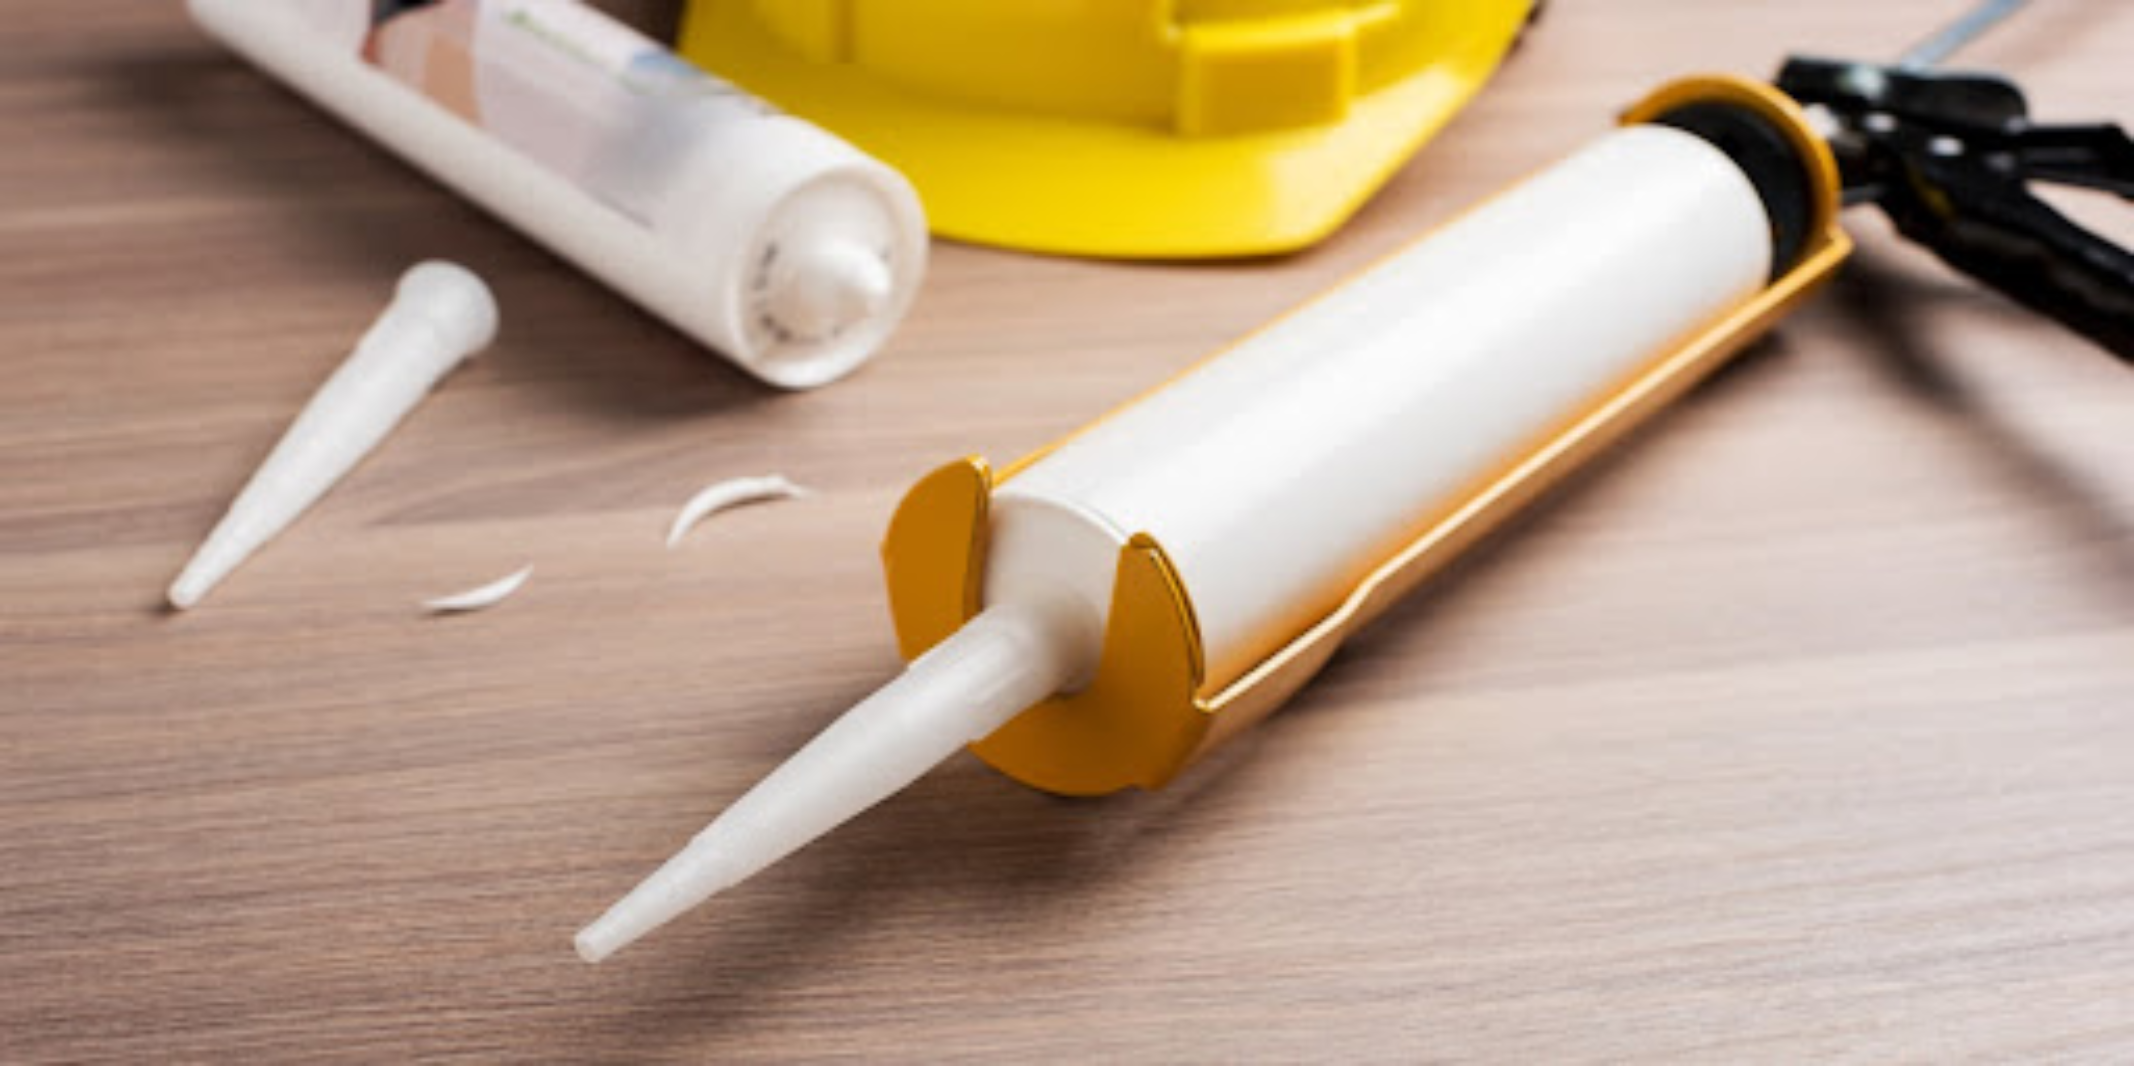 A caulking gun with a full tube of fresh caulk lying on a table next to an empty tube and a yellow hard hat.